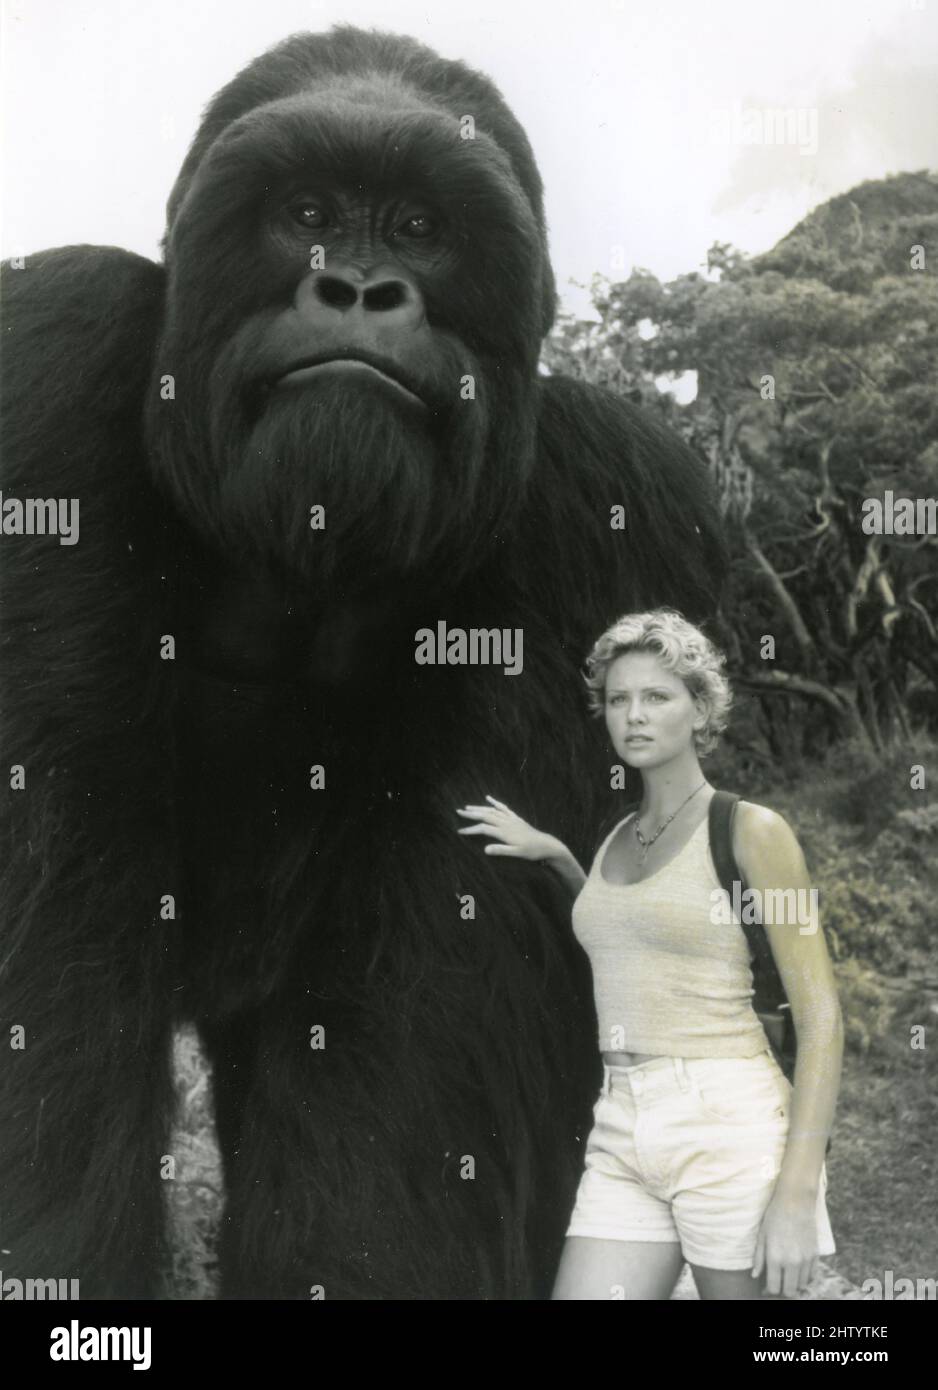 Actress Charlize Theron and the Gorilla in the movie Mighty Joe Young, USA 1998 Stock Photo